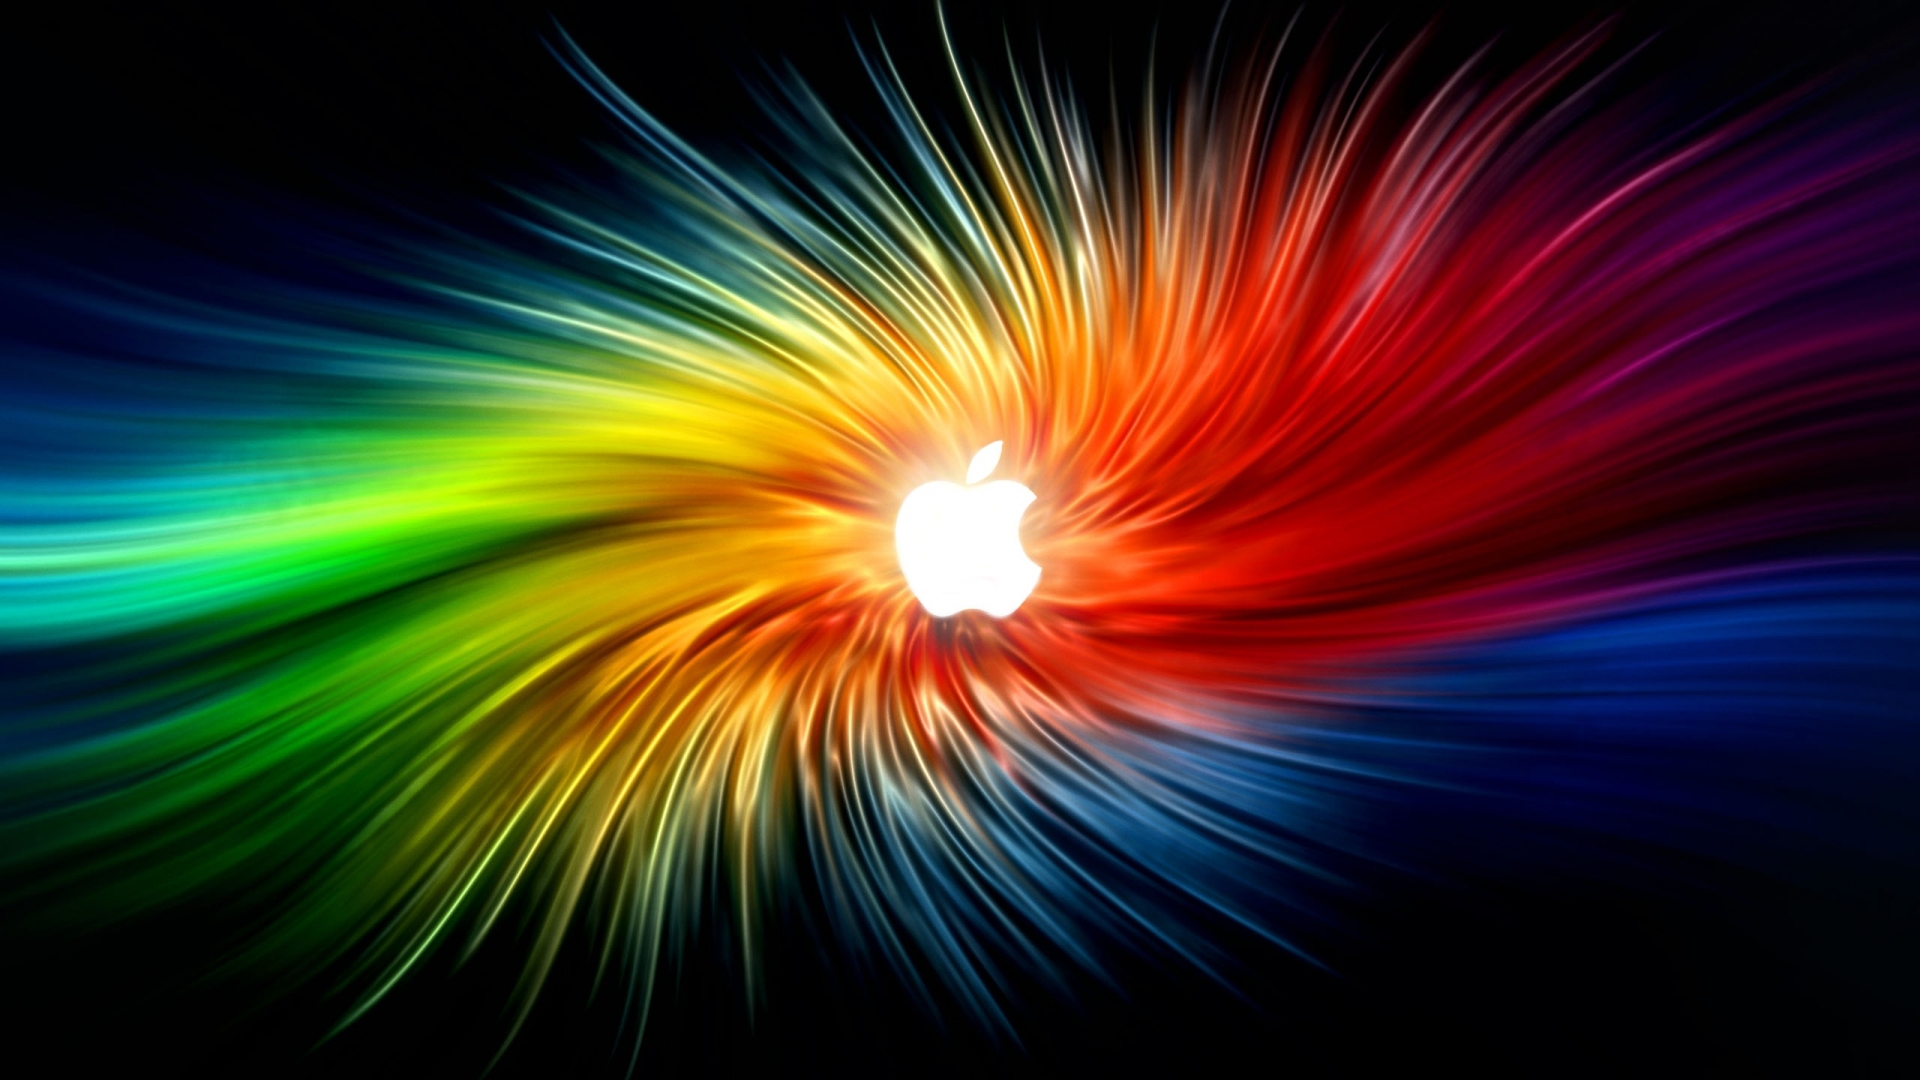 Wallpapers For > Awesome Apple Backgrounds - walmage.com - walmage.com